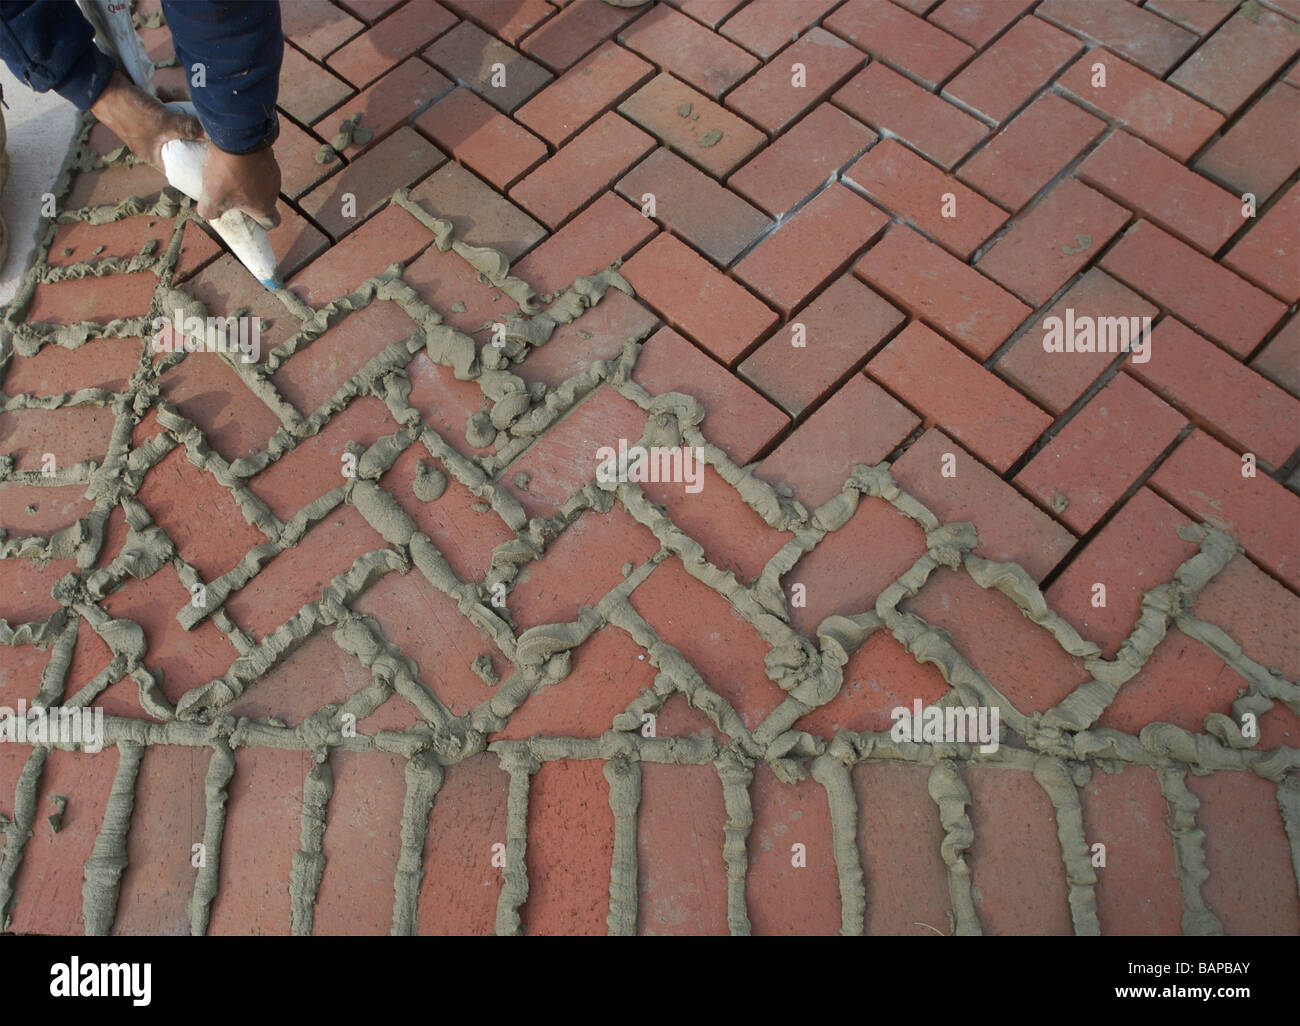 Using a squeeze bag to grout between paving bricks. Stock Photo